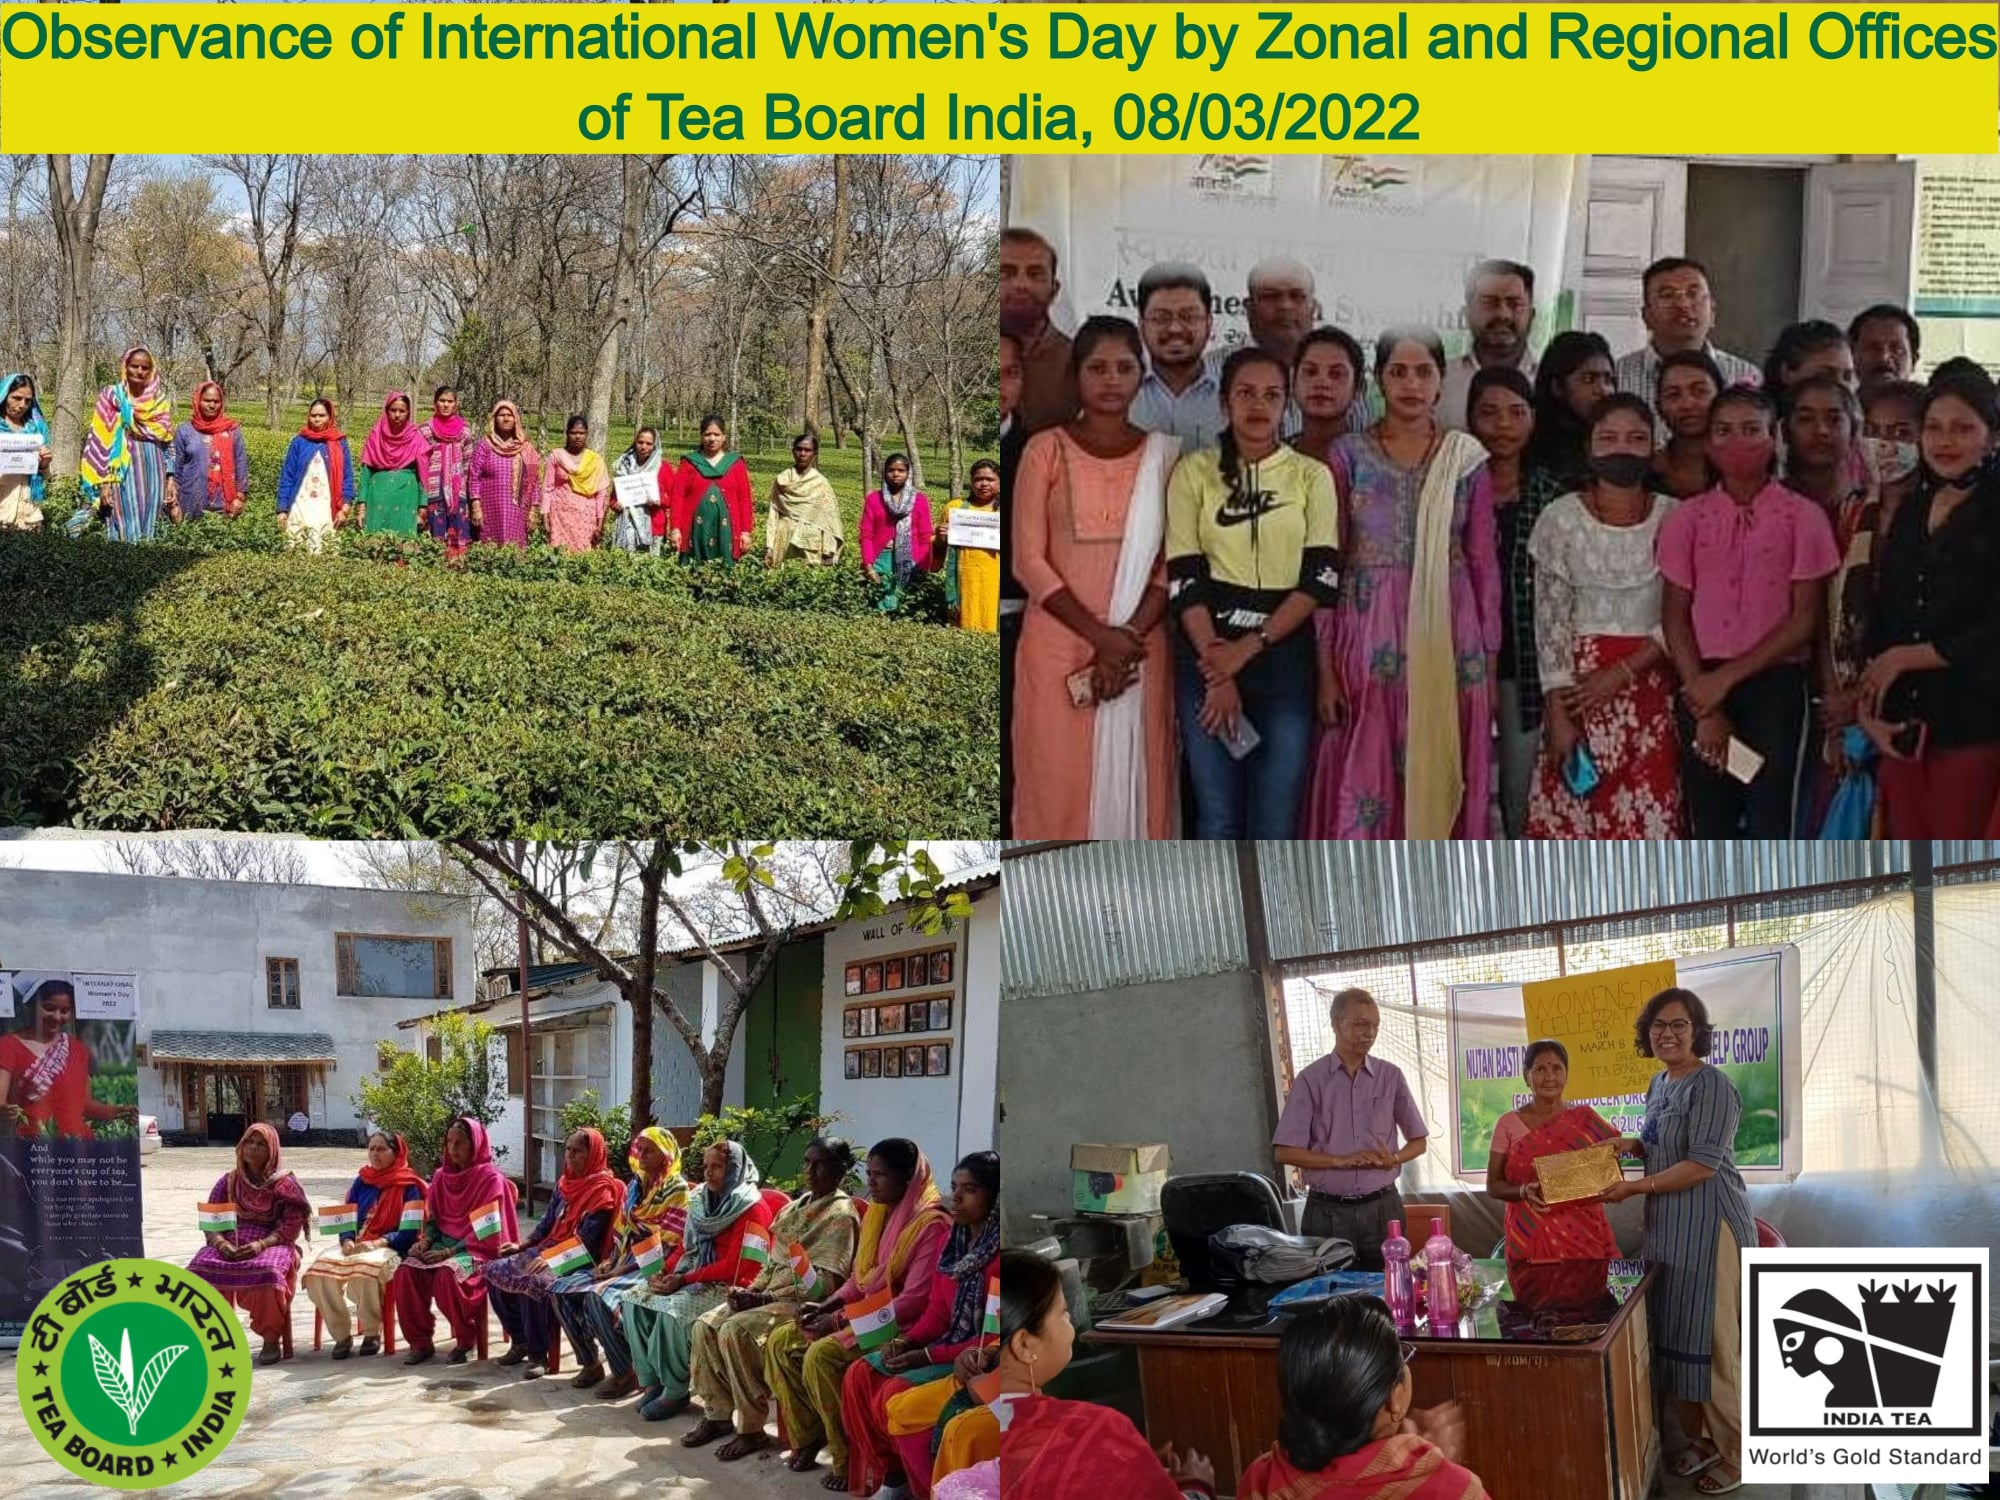 Observance of International Women's Day by Zonal and Regional Offices of Tea Board India, 08-03-2022